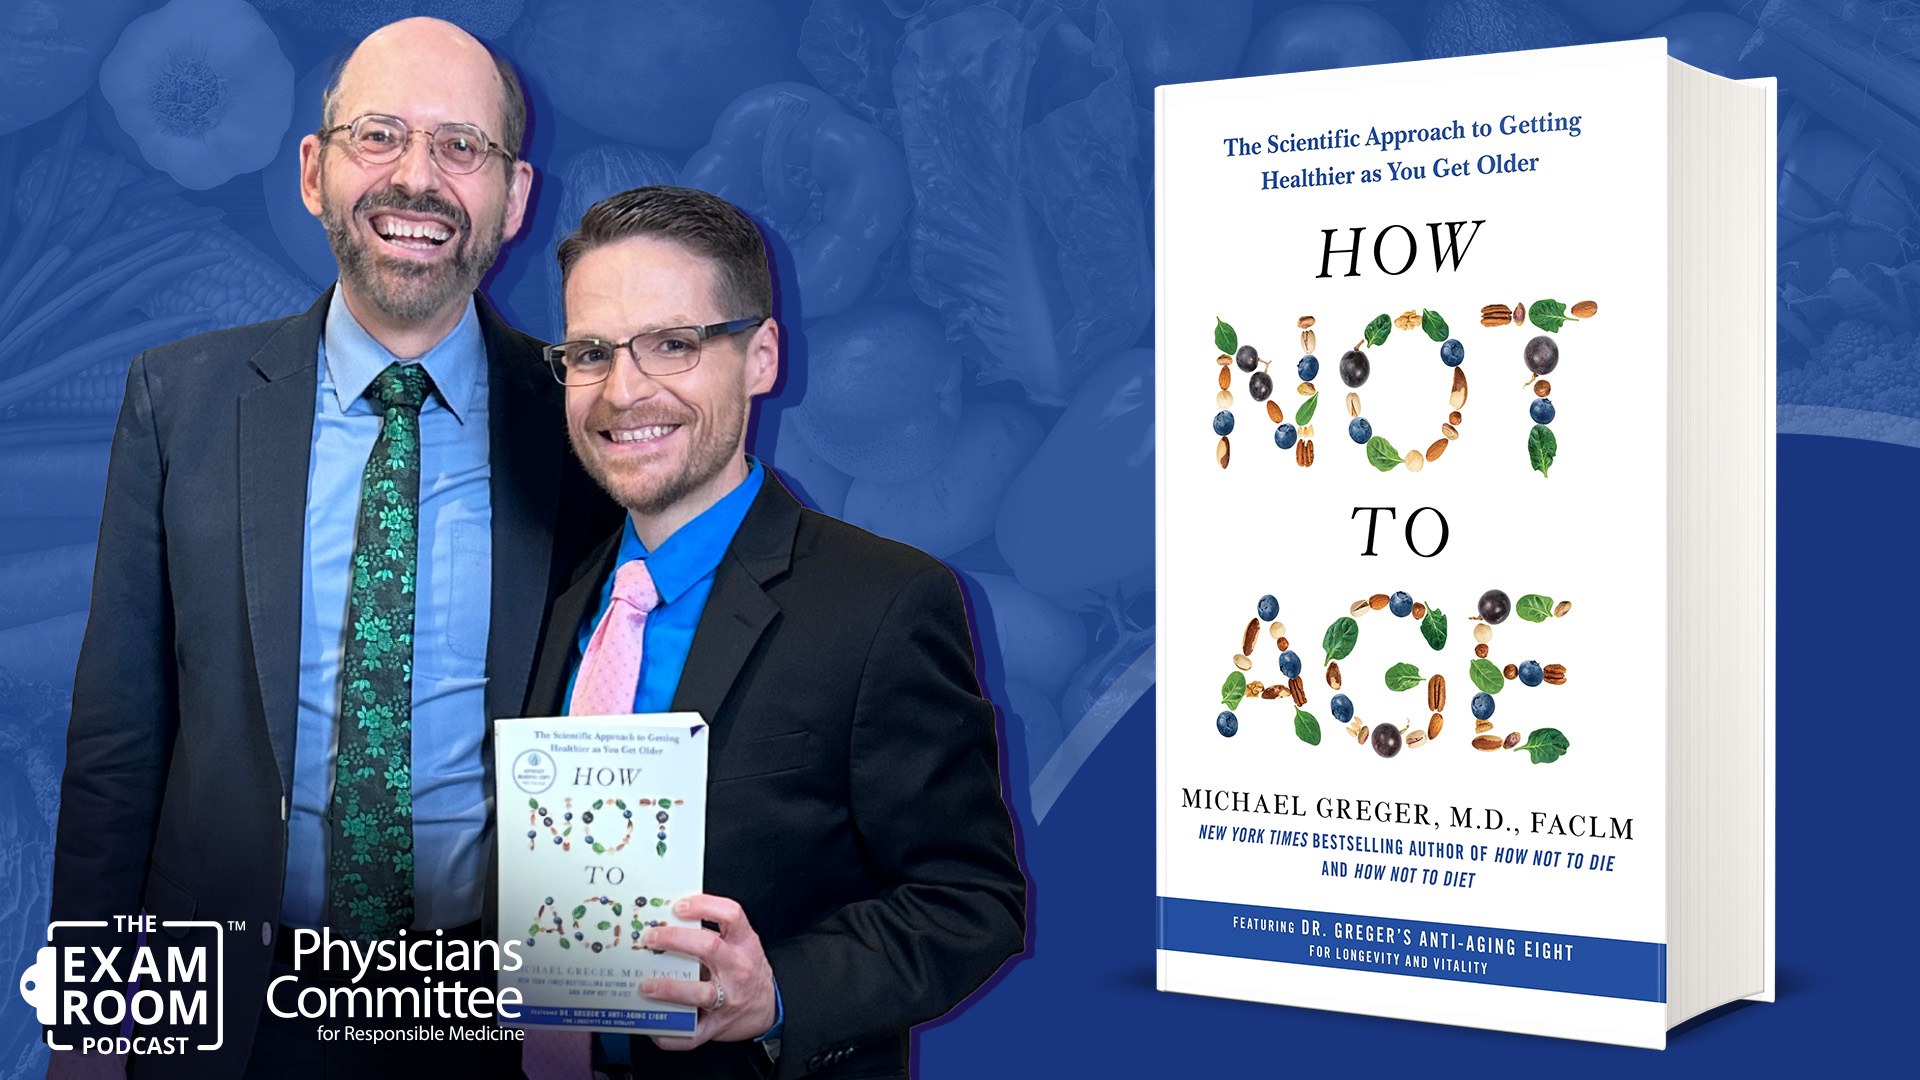 Dr. Michael Greger: Inside “How Not To Age”